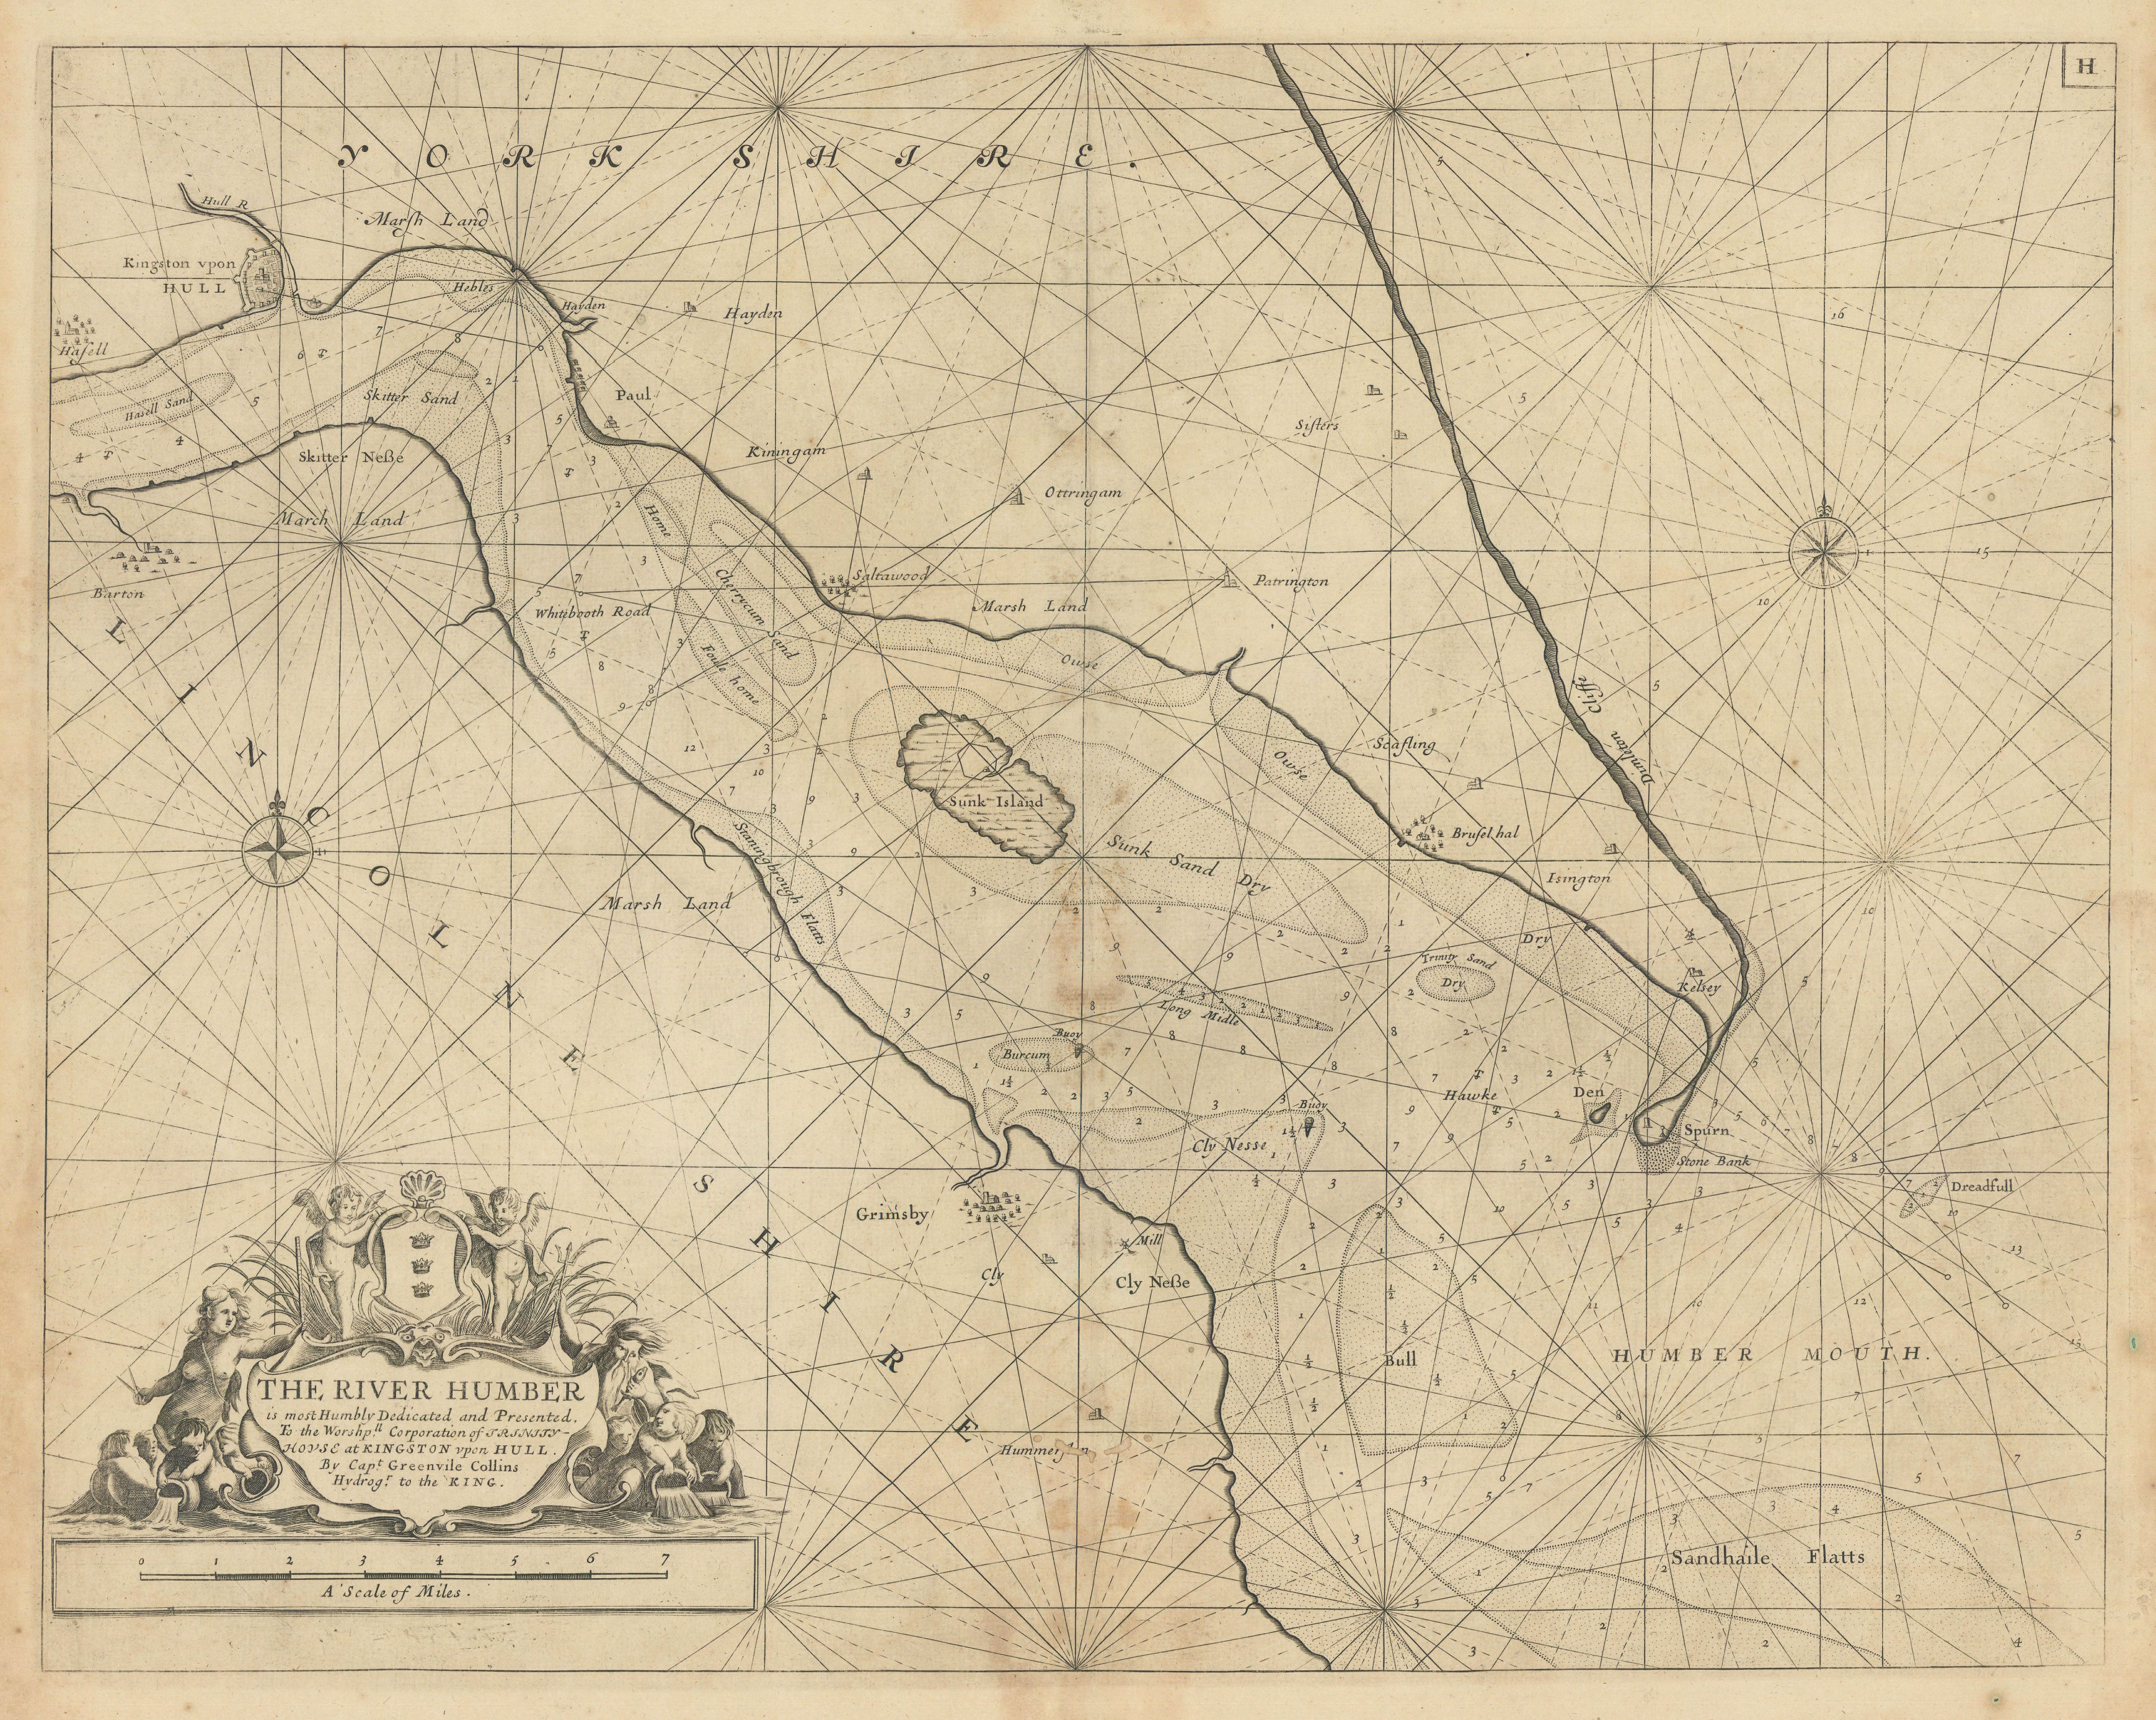 Associate Product The River Humber estuary sea chart. Hull, Grimsby & Barton. COLLINS 1723 map